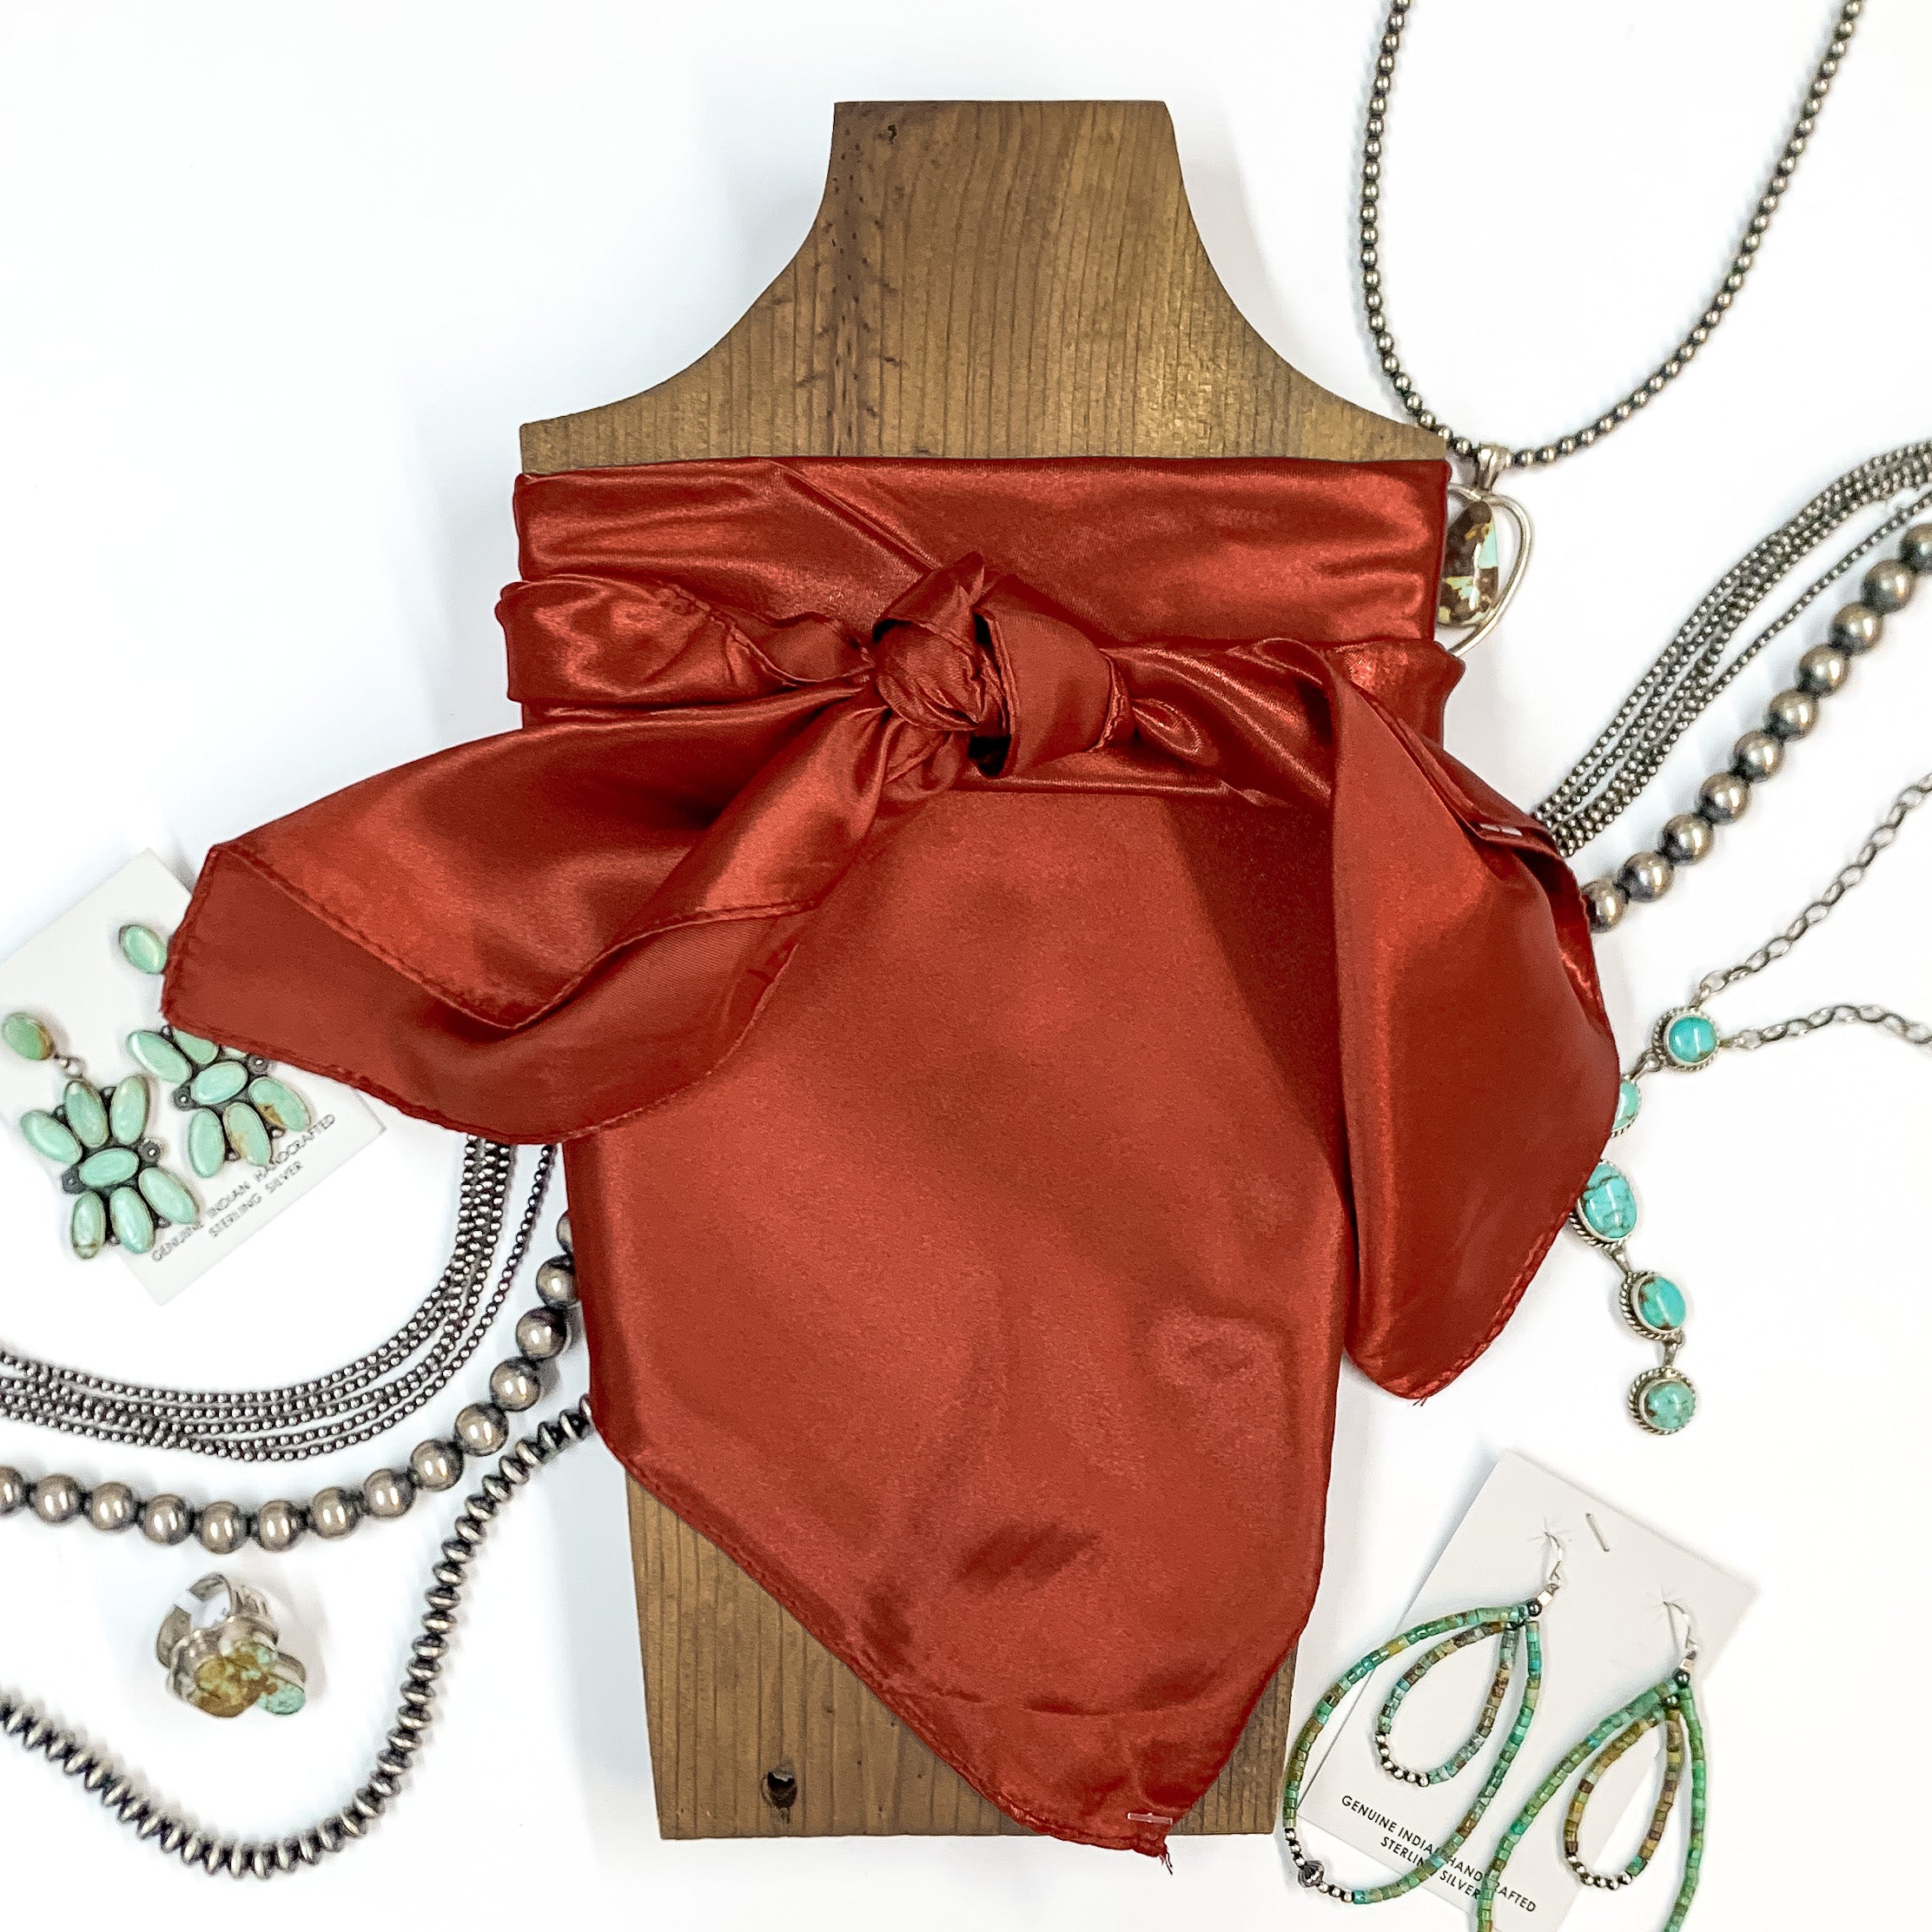 Solid colored scarf in Rust. Scarf is tied around a wooden piece. The scarf and piece of wood is pictured on a white background with Navajo jewelry spread out around it.